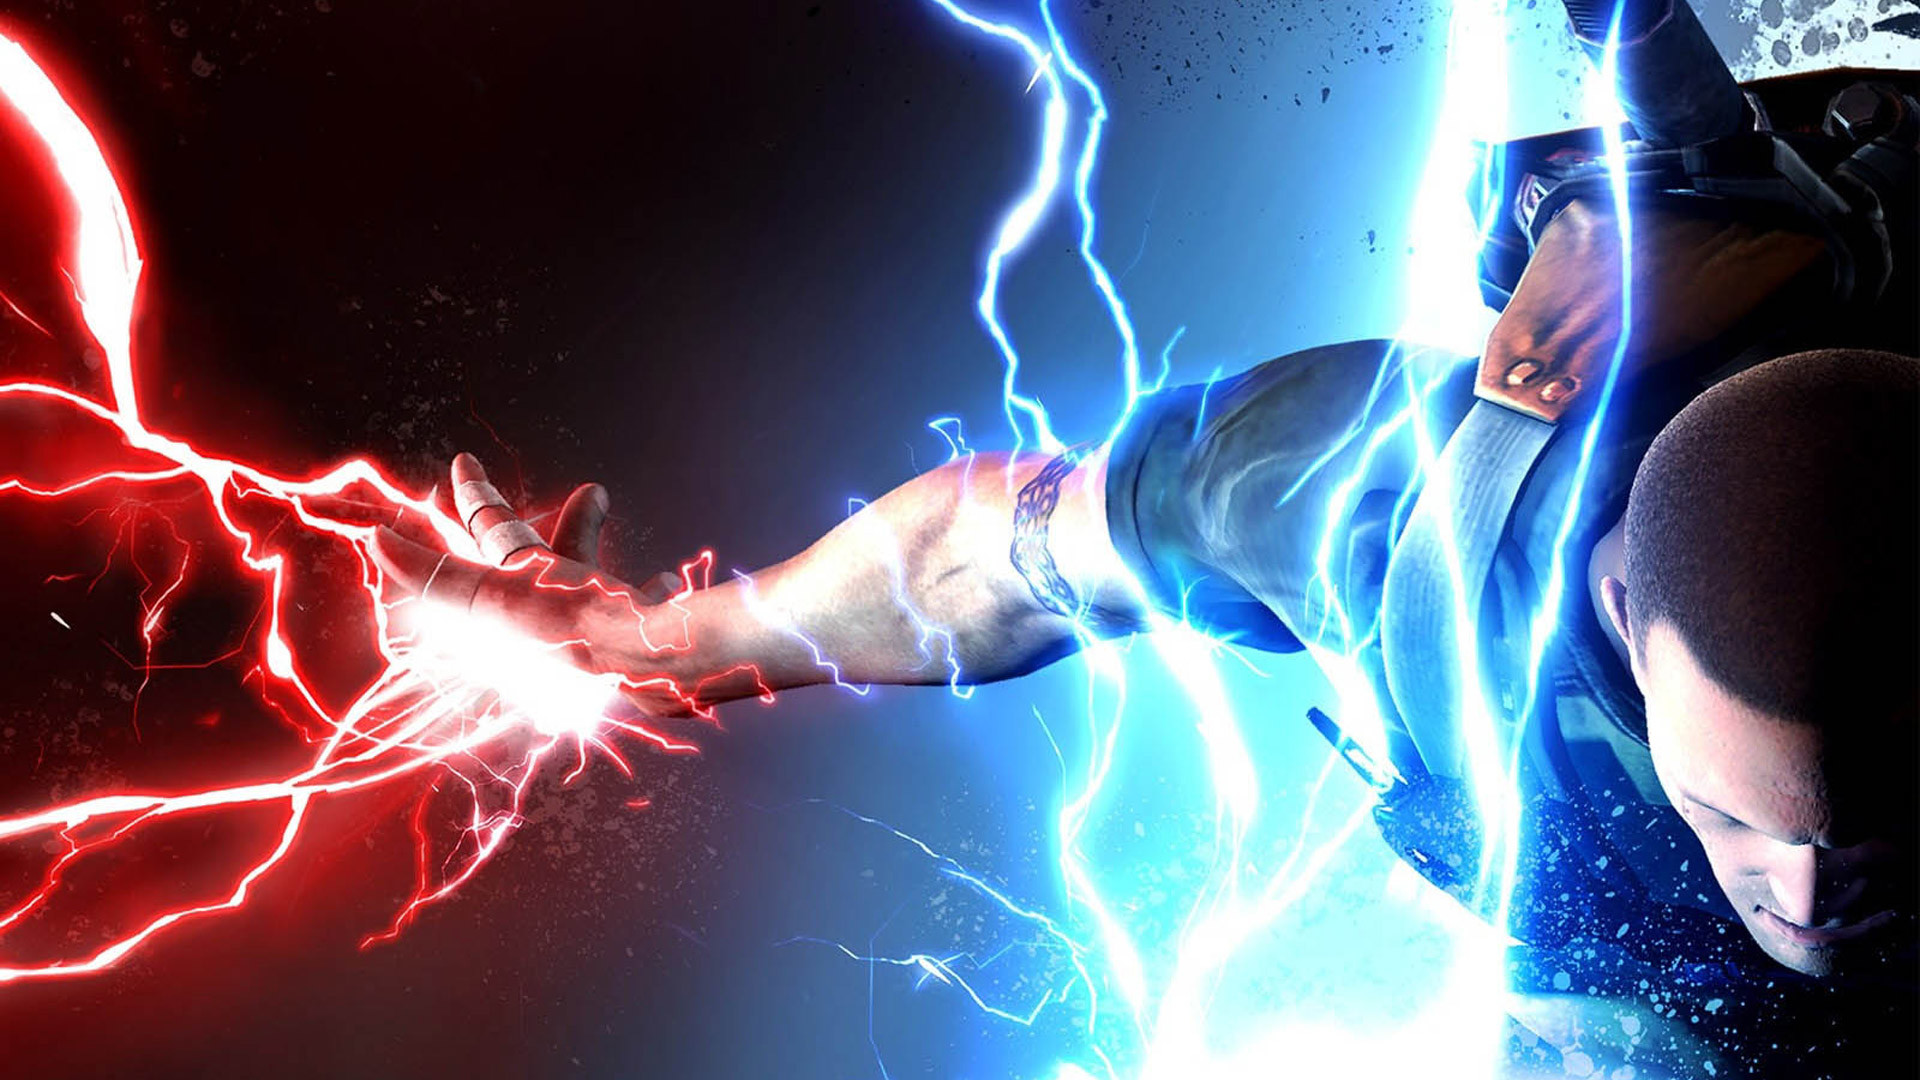 1920x1080 Free Infamous 2 Wallpaper in 